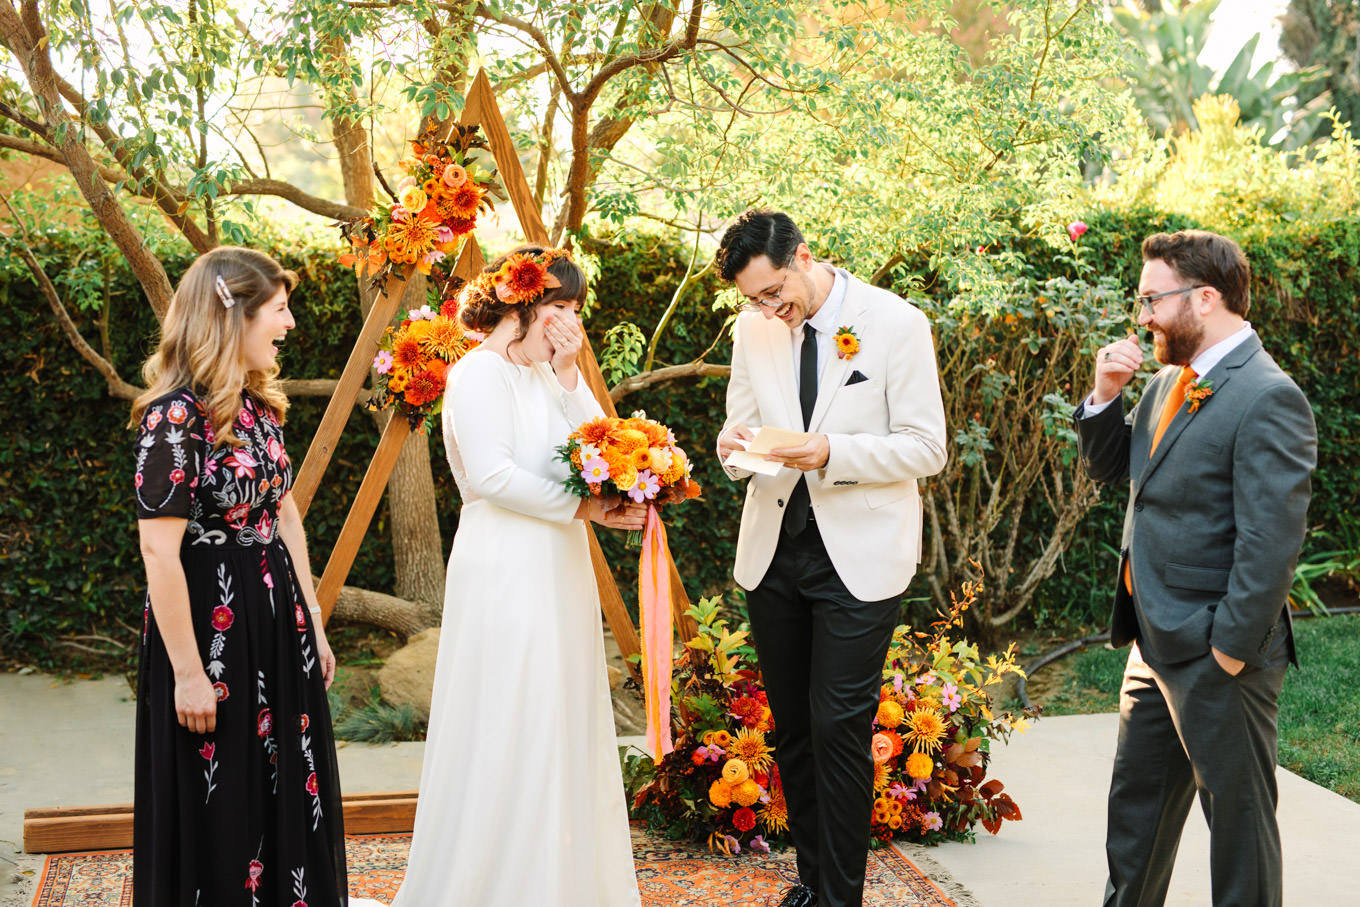 Bride and groom sharing a sweet moment at ceremony | Vibrant backyard micro wedding featured on Green Wedding Shoes | Colorful LA wedding photography | #losangeleswedding #backyardwedding #microwedding #laweddingphotographer Source: Mary Costa Photography | Los Angeles